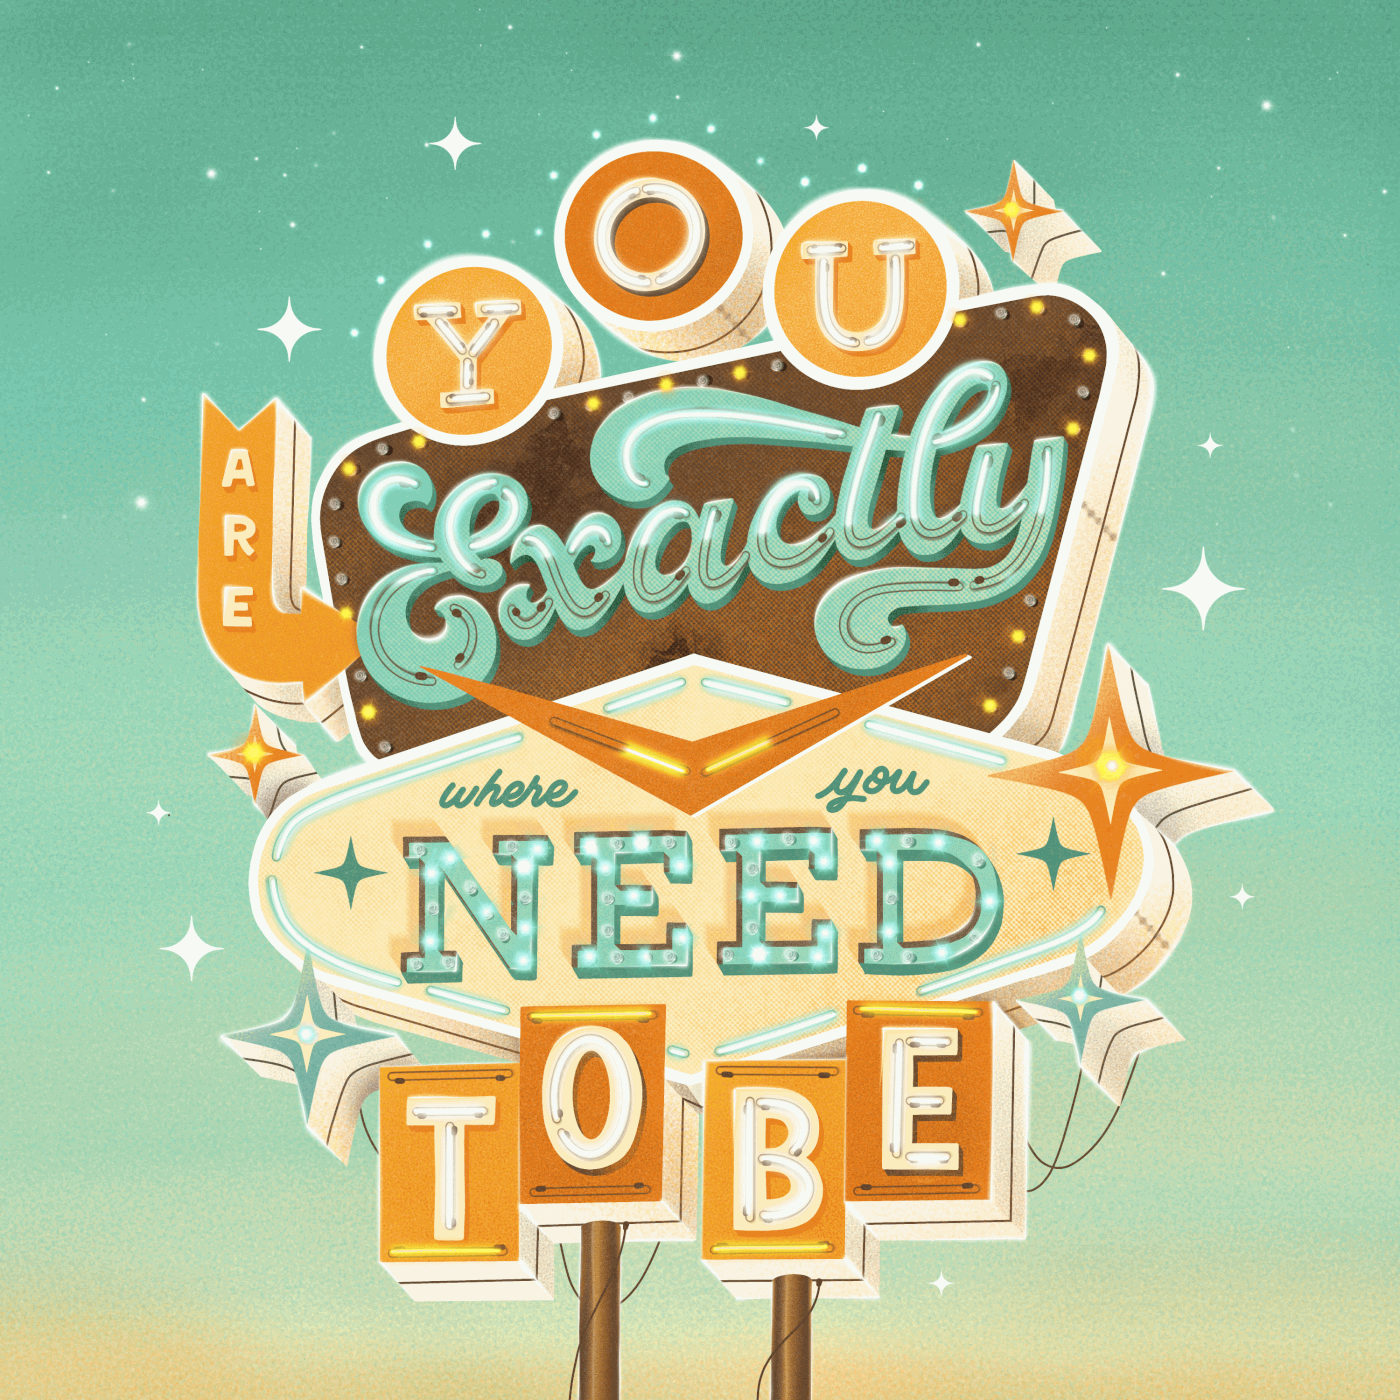 "You are exactly where you need to be" Retro Sign lettering in Procreate